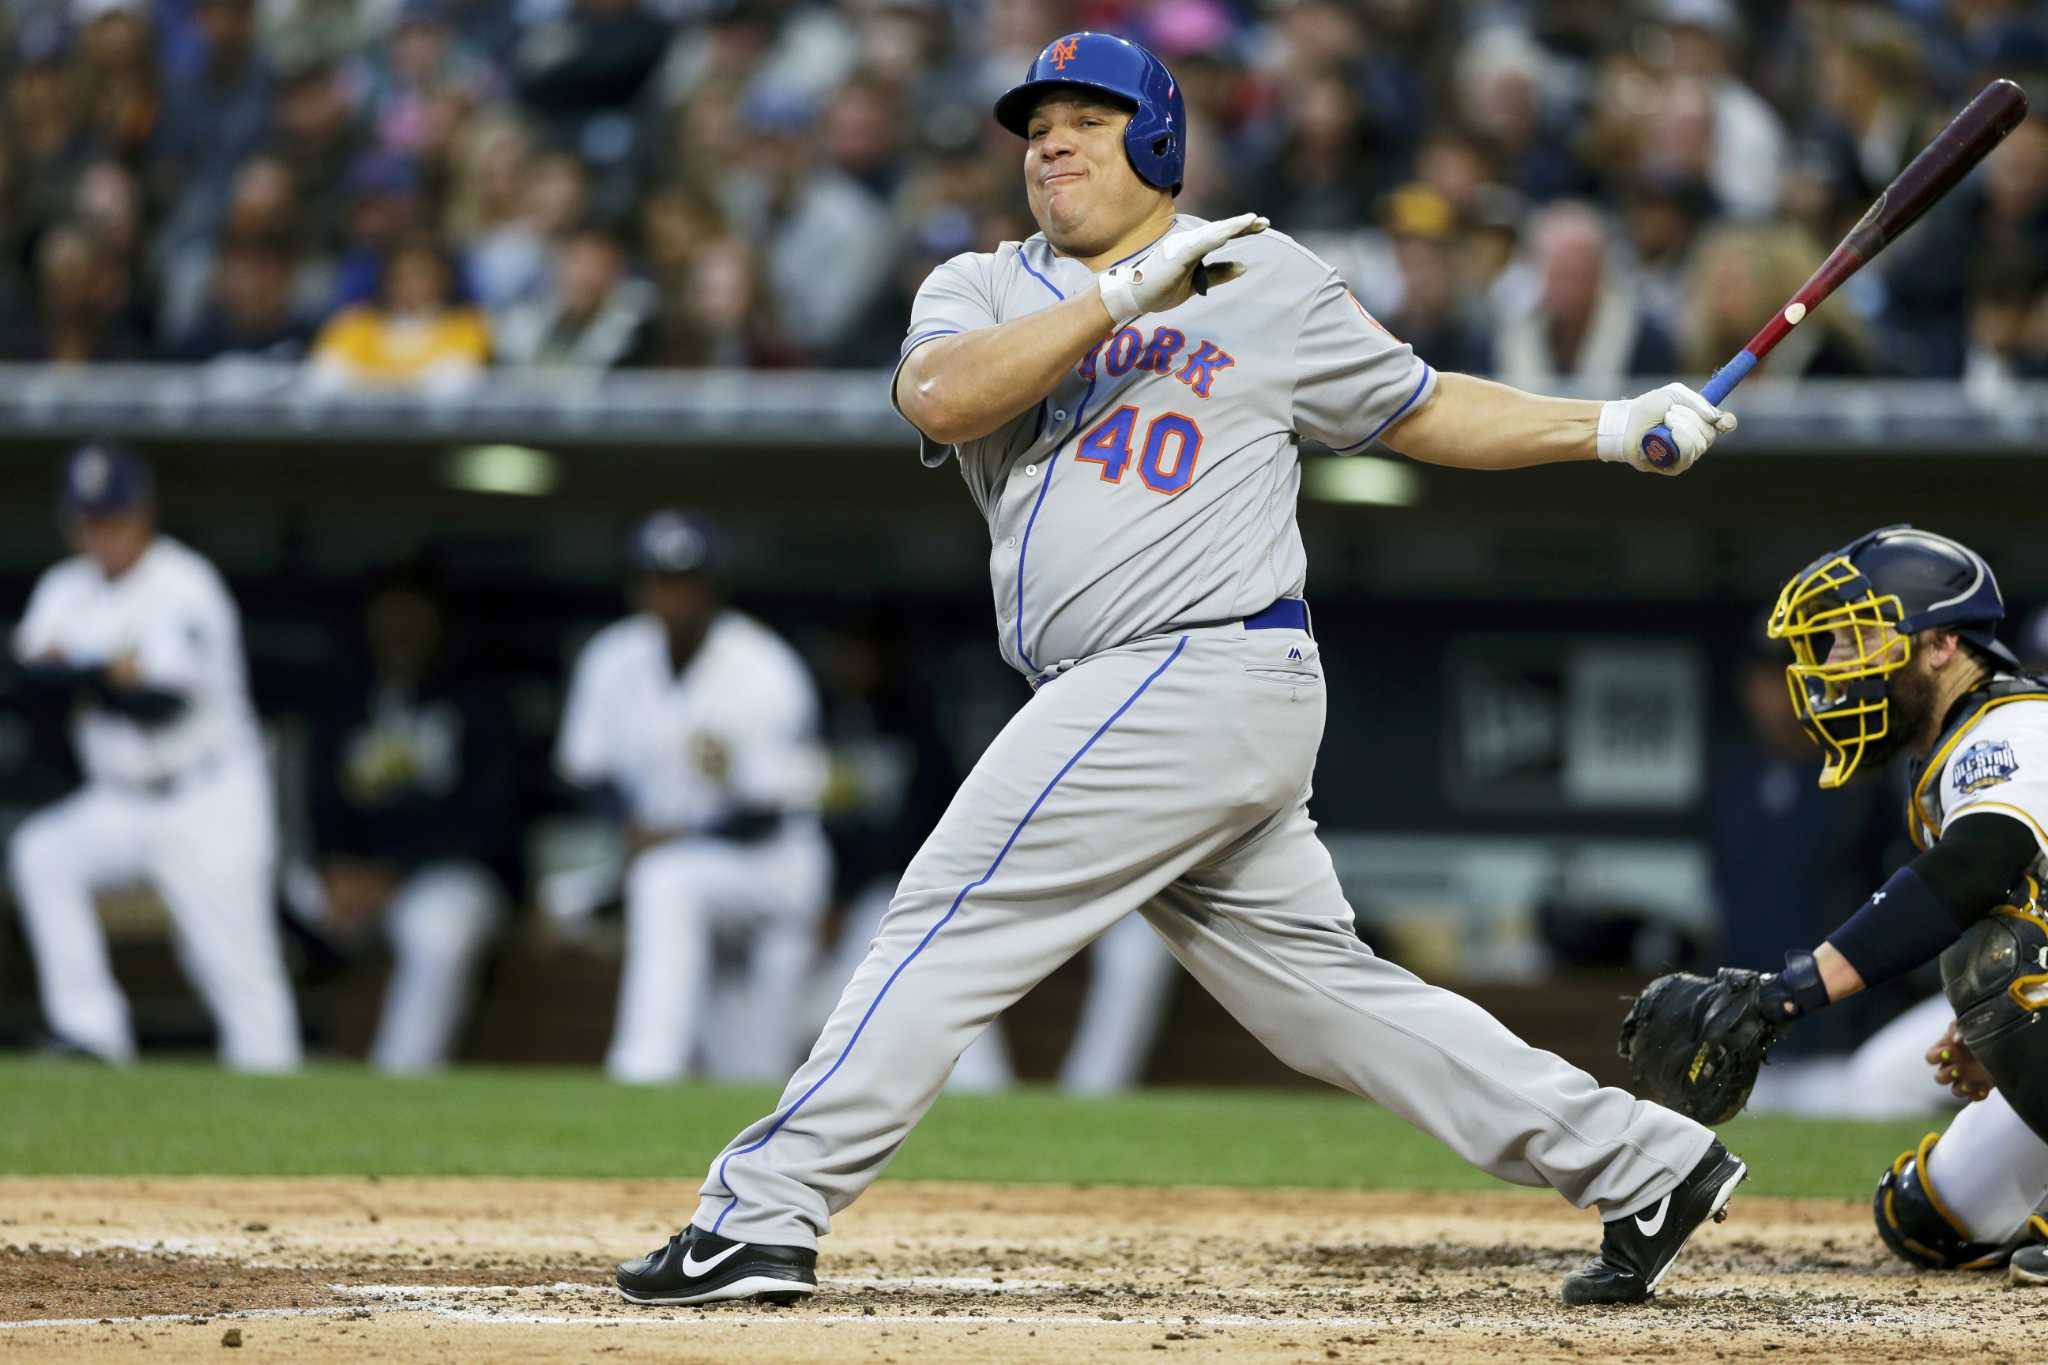 Bartolo Colon is still crushing homers at 47 because he's a champion